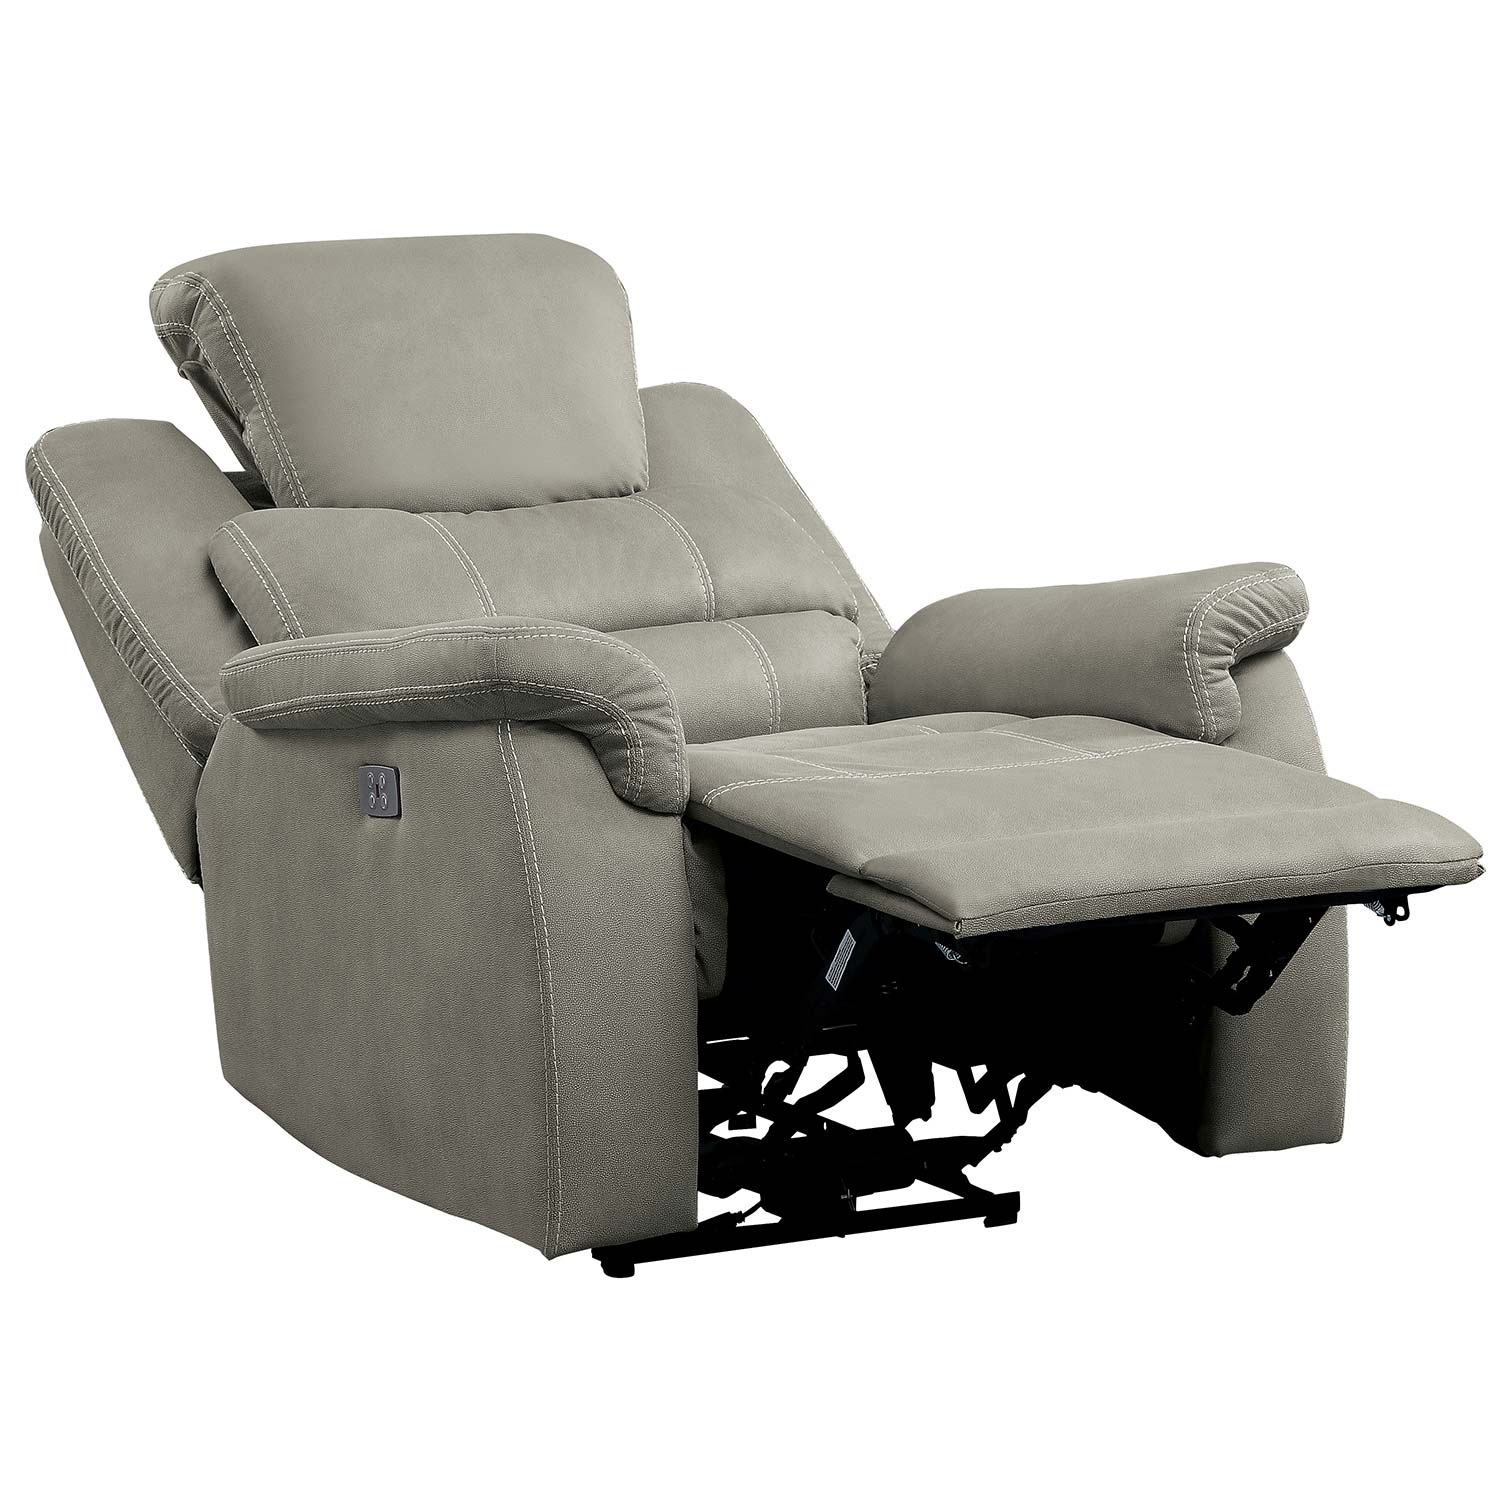 Homelegance Shola Power Reclining Chair with Power Headrest - Gray